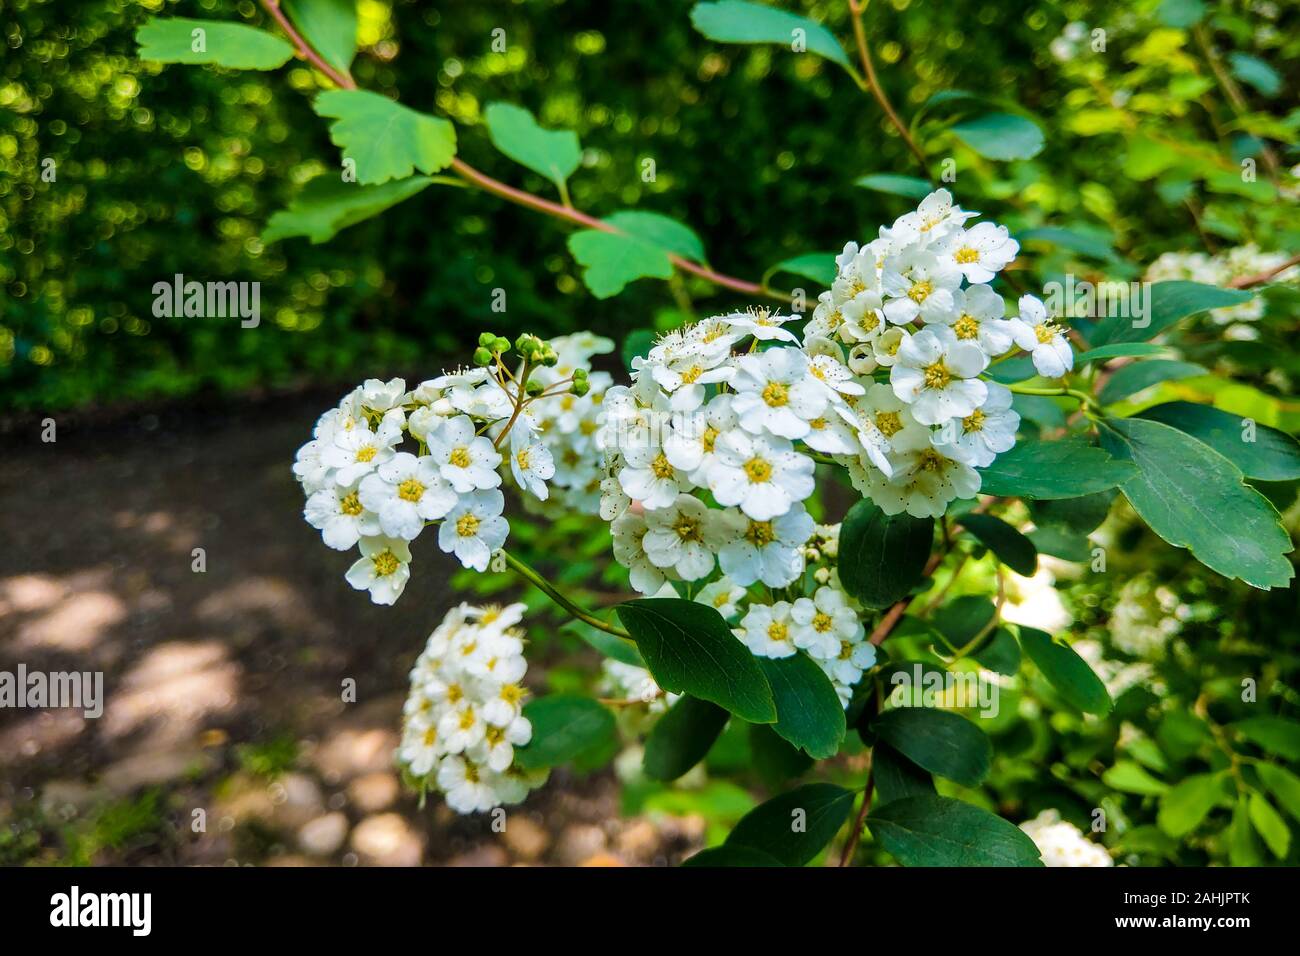 White flowers and green leaf of common lantana plant. Stock Photo